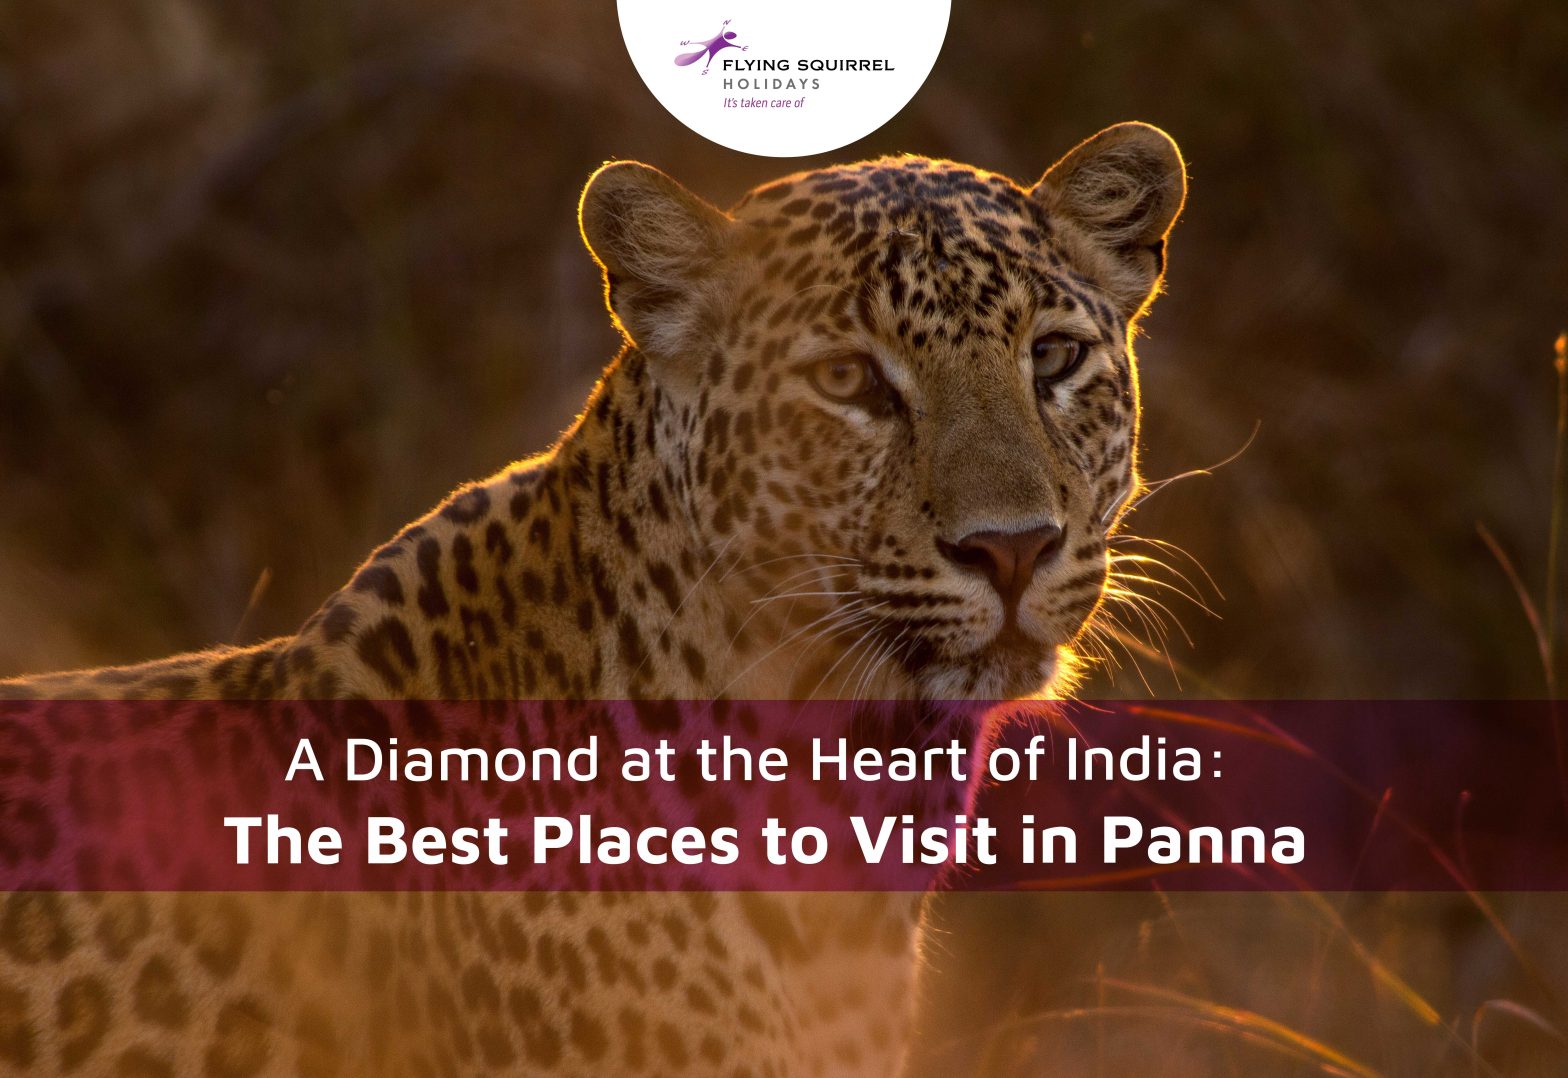 A Diamond at the Heart of India: The Best Places to Visit in Panna